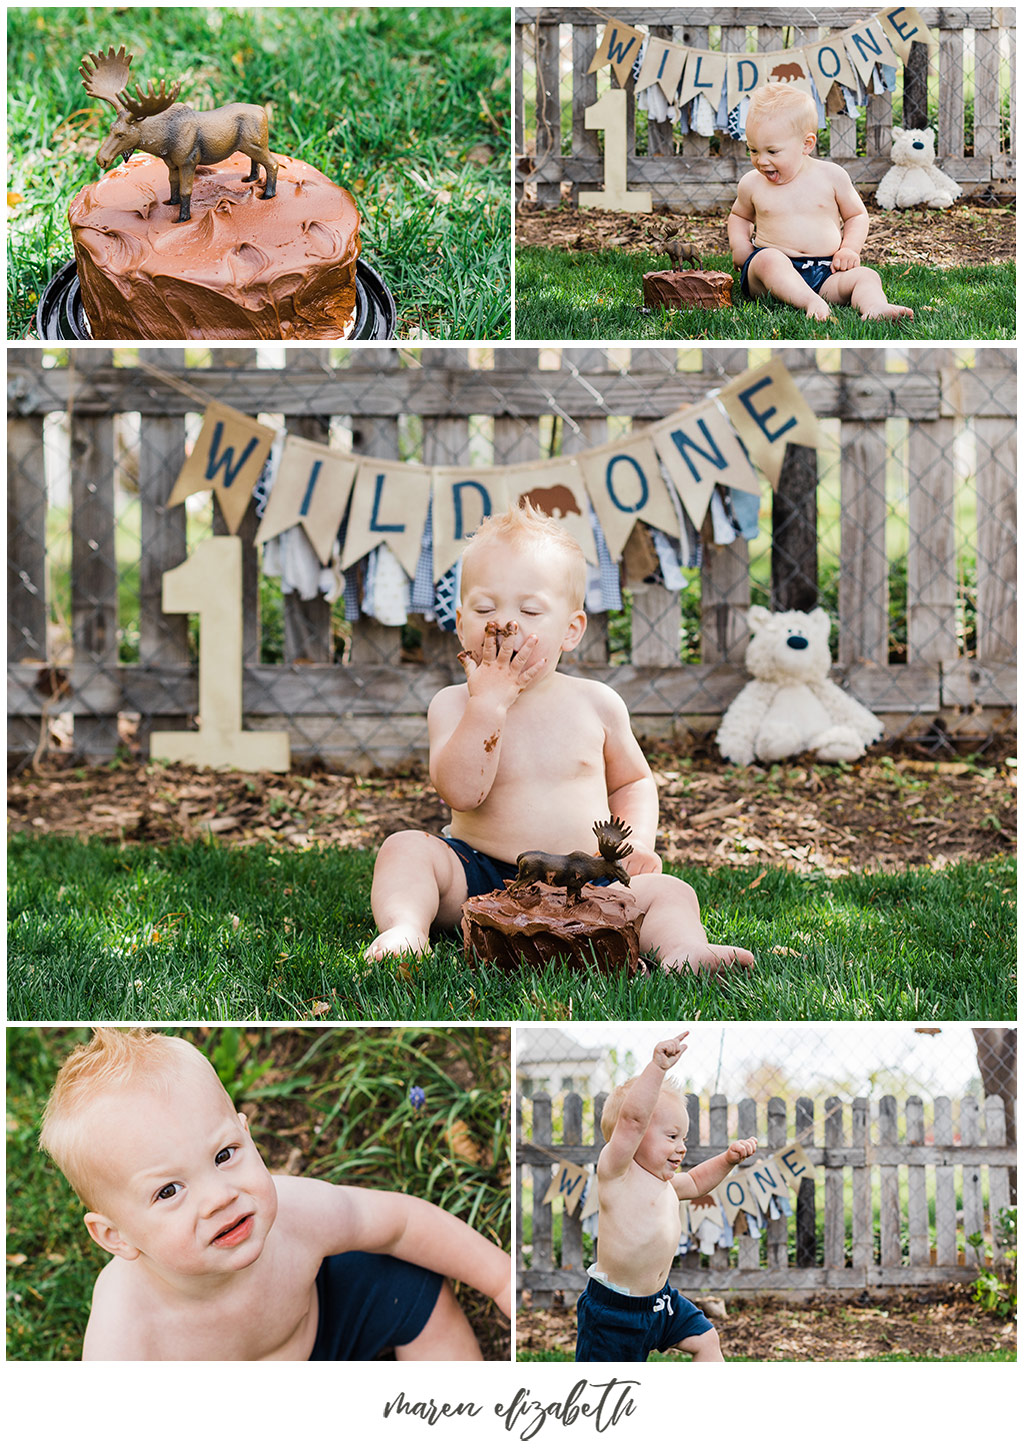 Outdoor, Wild One, little boy cake smash captured by Maren Elizabeth Photography. I love doing cake smashes outside because it makes clean up so easy! | Arizona Family Photographer